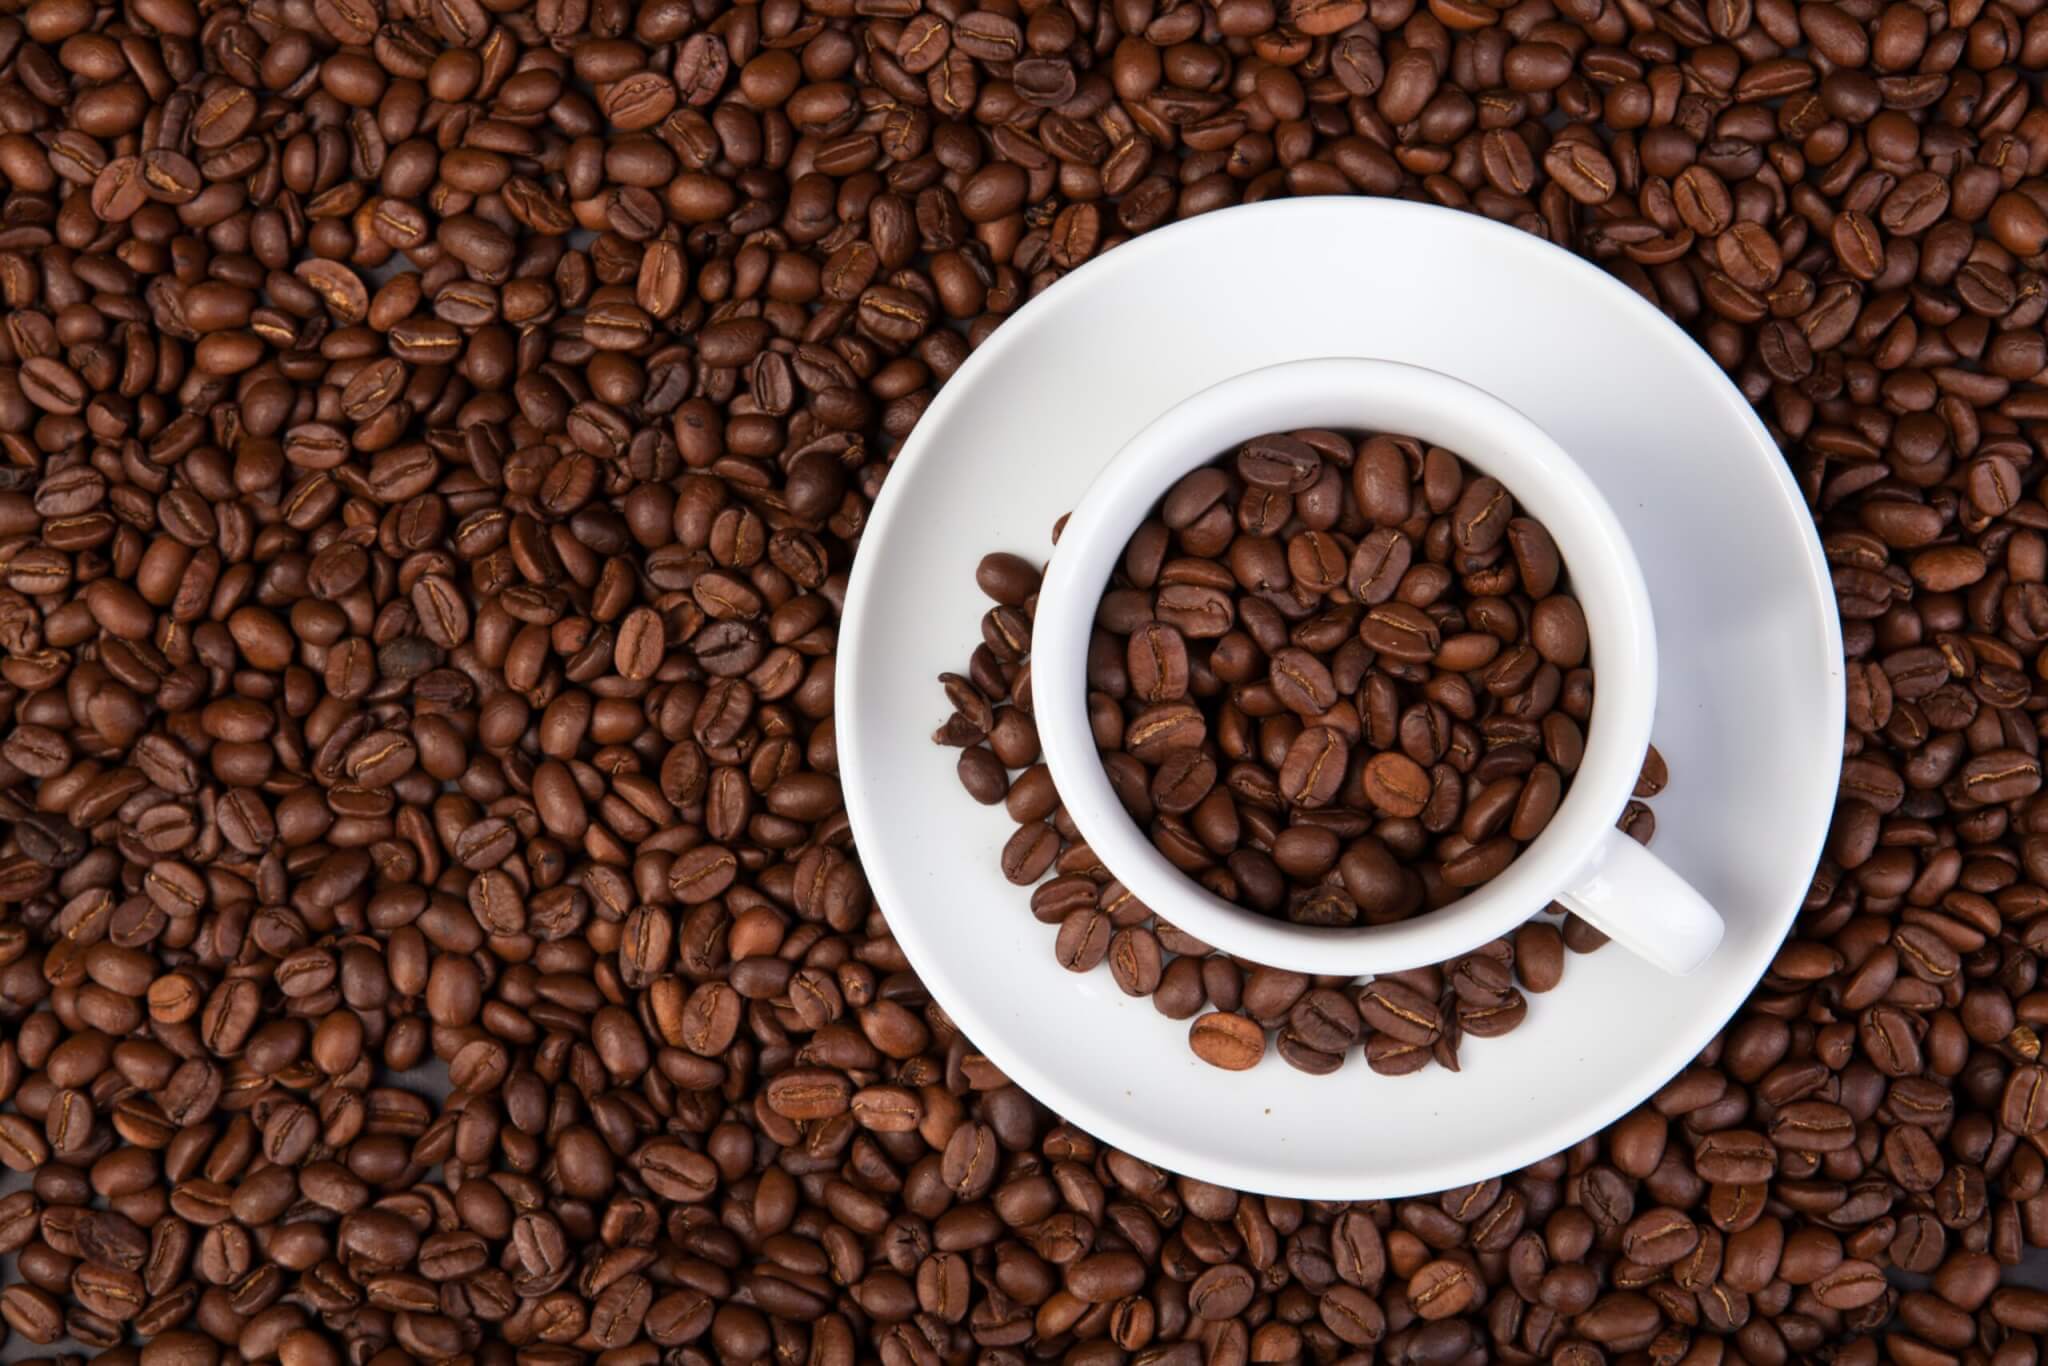 Best Of The Best Coffee Beans In 2023: Top 5 Brews Most Recommended By Experts